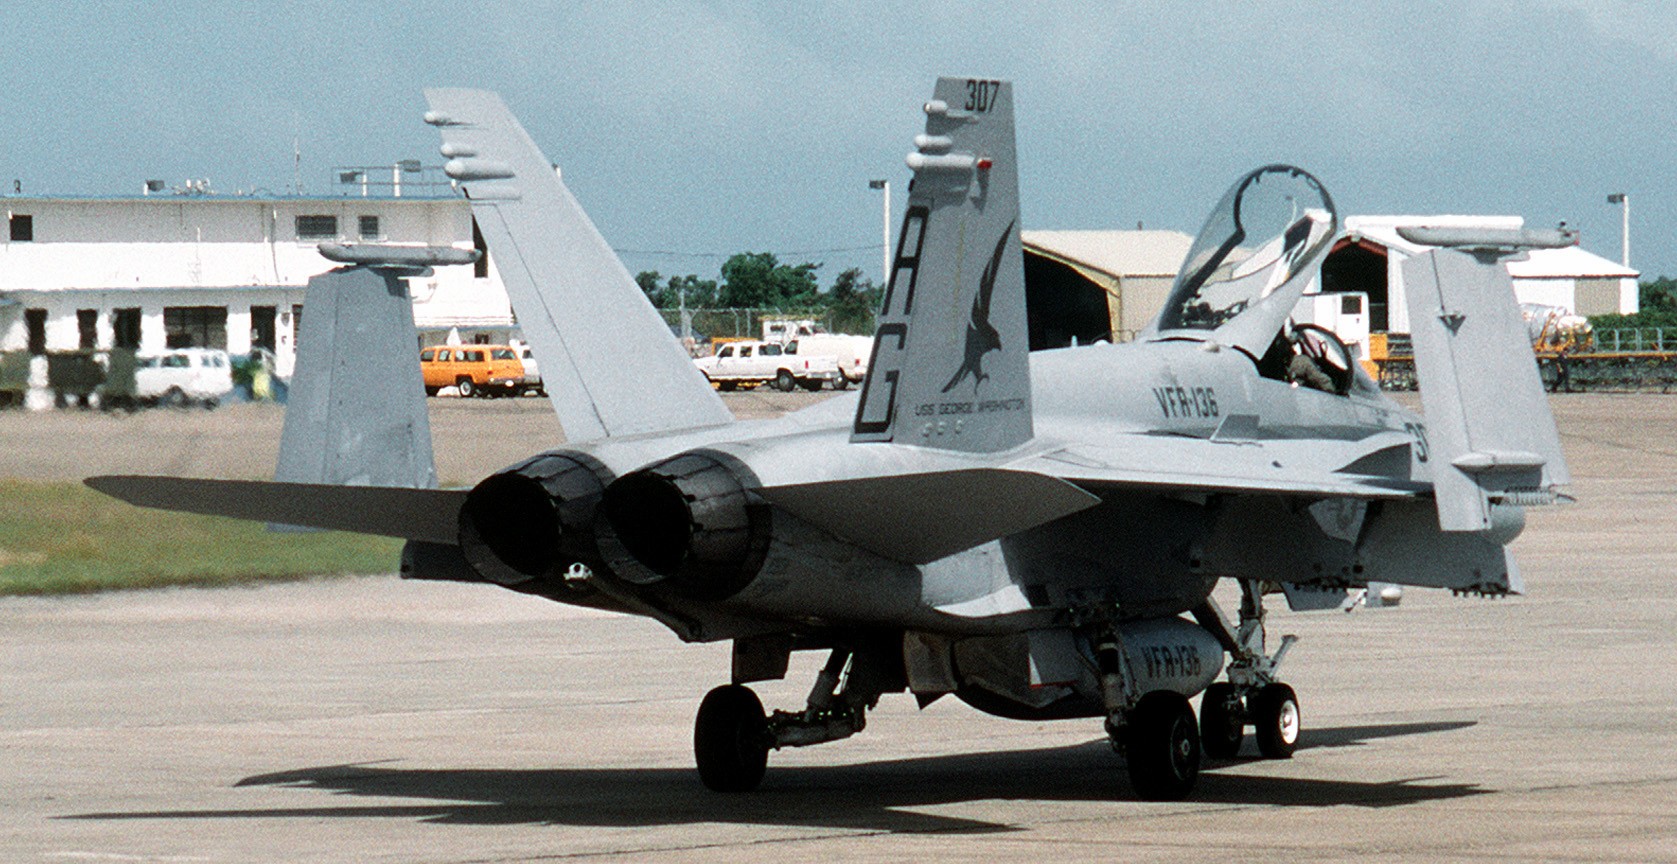 vfa-136 knighthawks strike fighter squadron f/a-18c hornet 1992 73 cvw-7 naval station roosevelt roads puerto rico